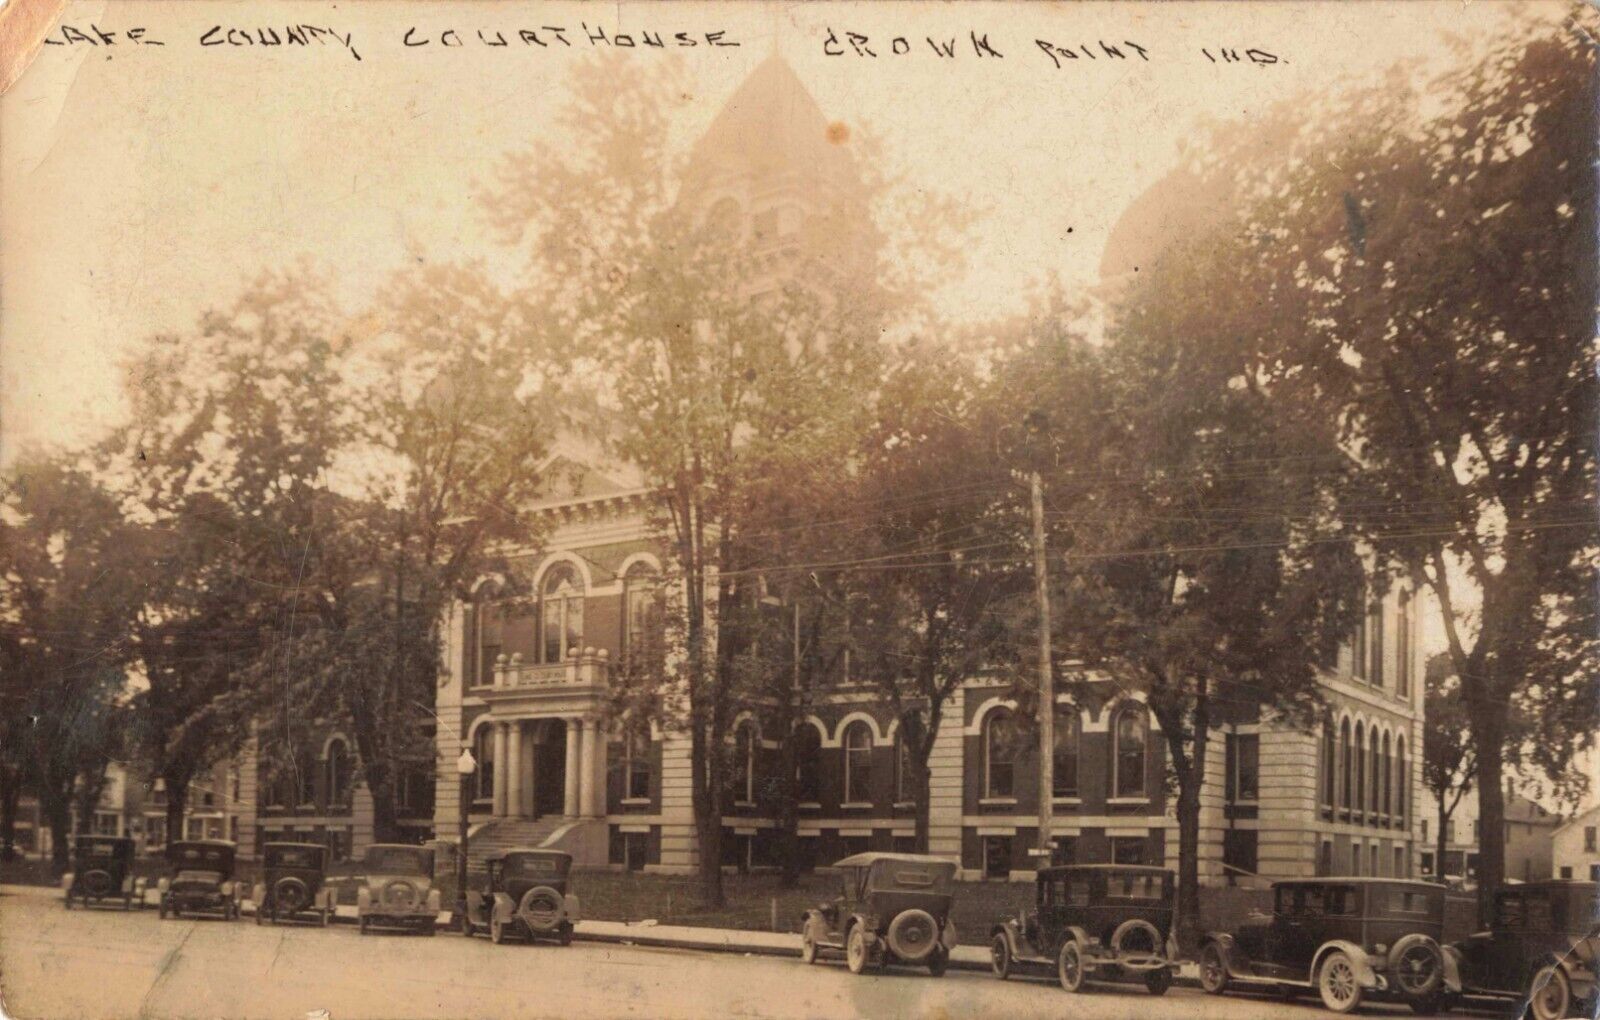 Lake County Court House Crown Point Indiana IN Old Cars 1926 Real Photo RPPC